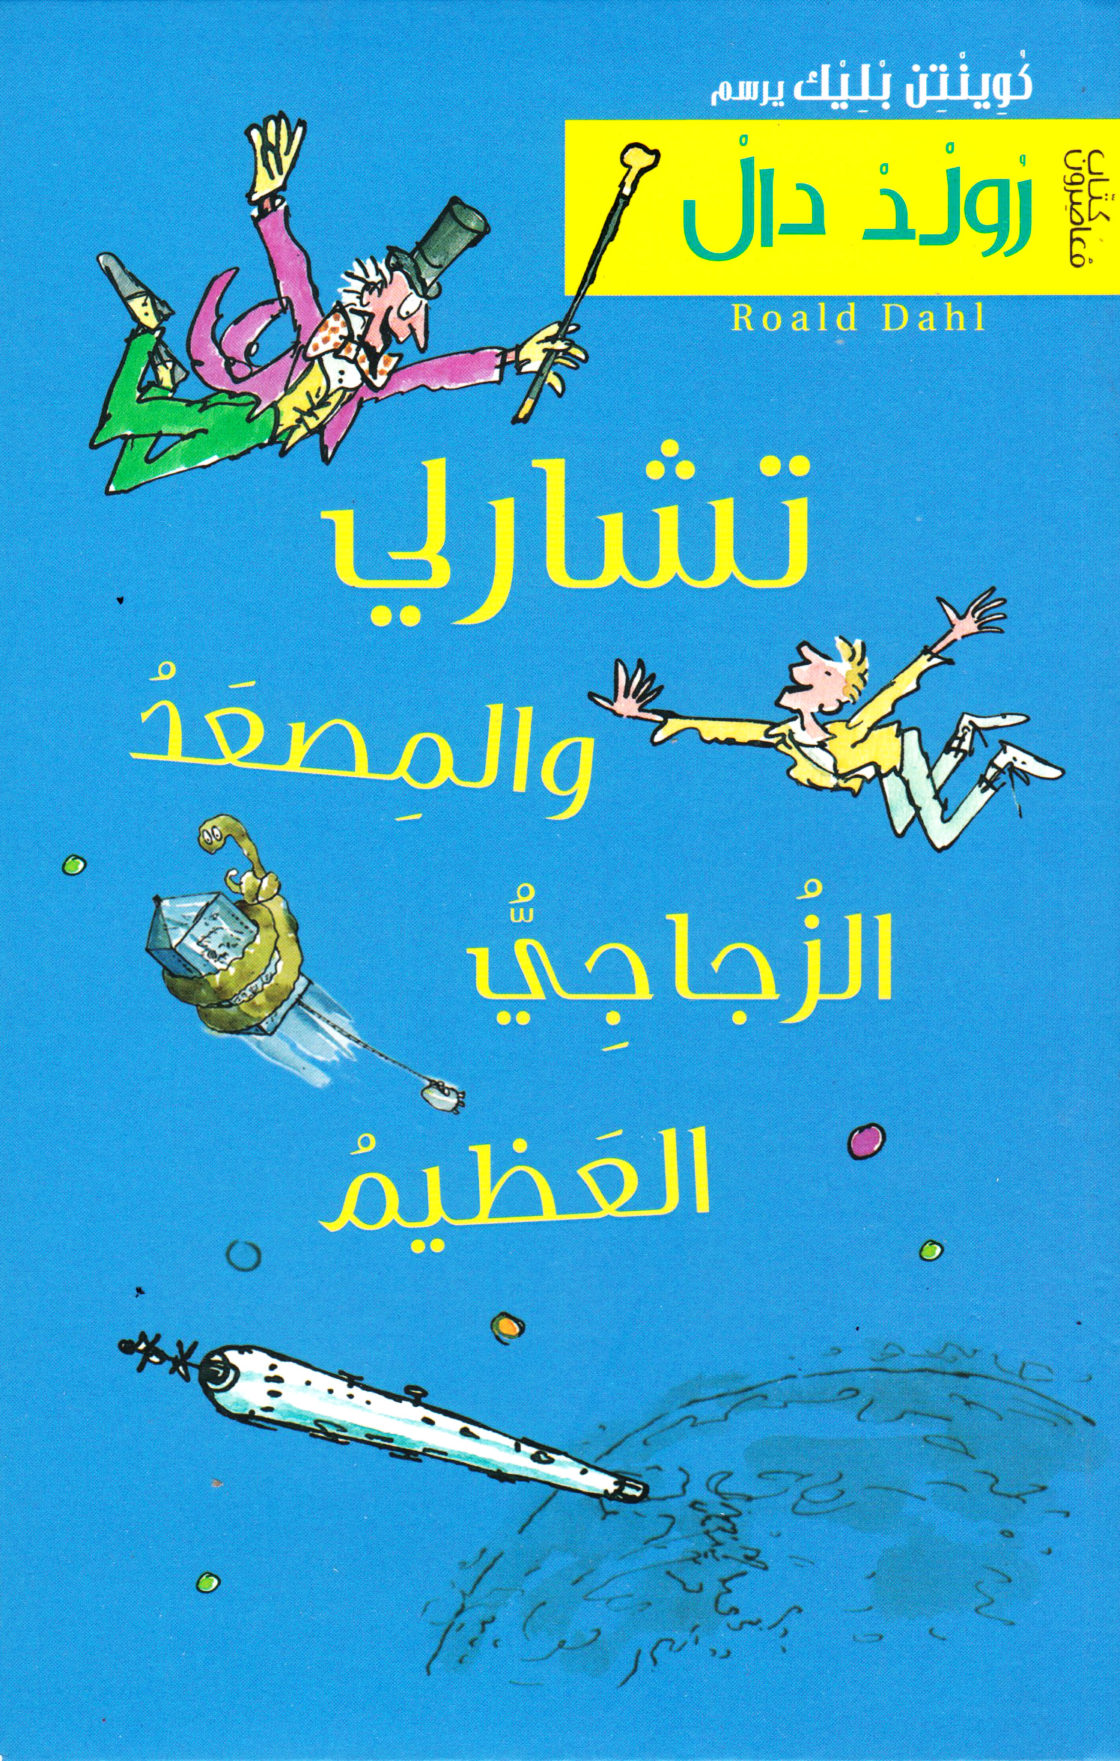 Charlie and the Great Glass Elevator (Arabic)